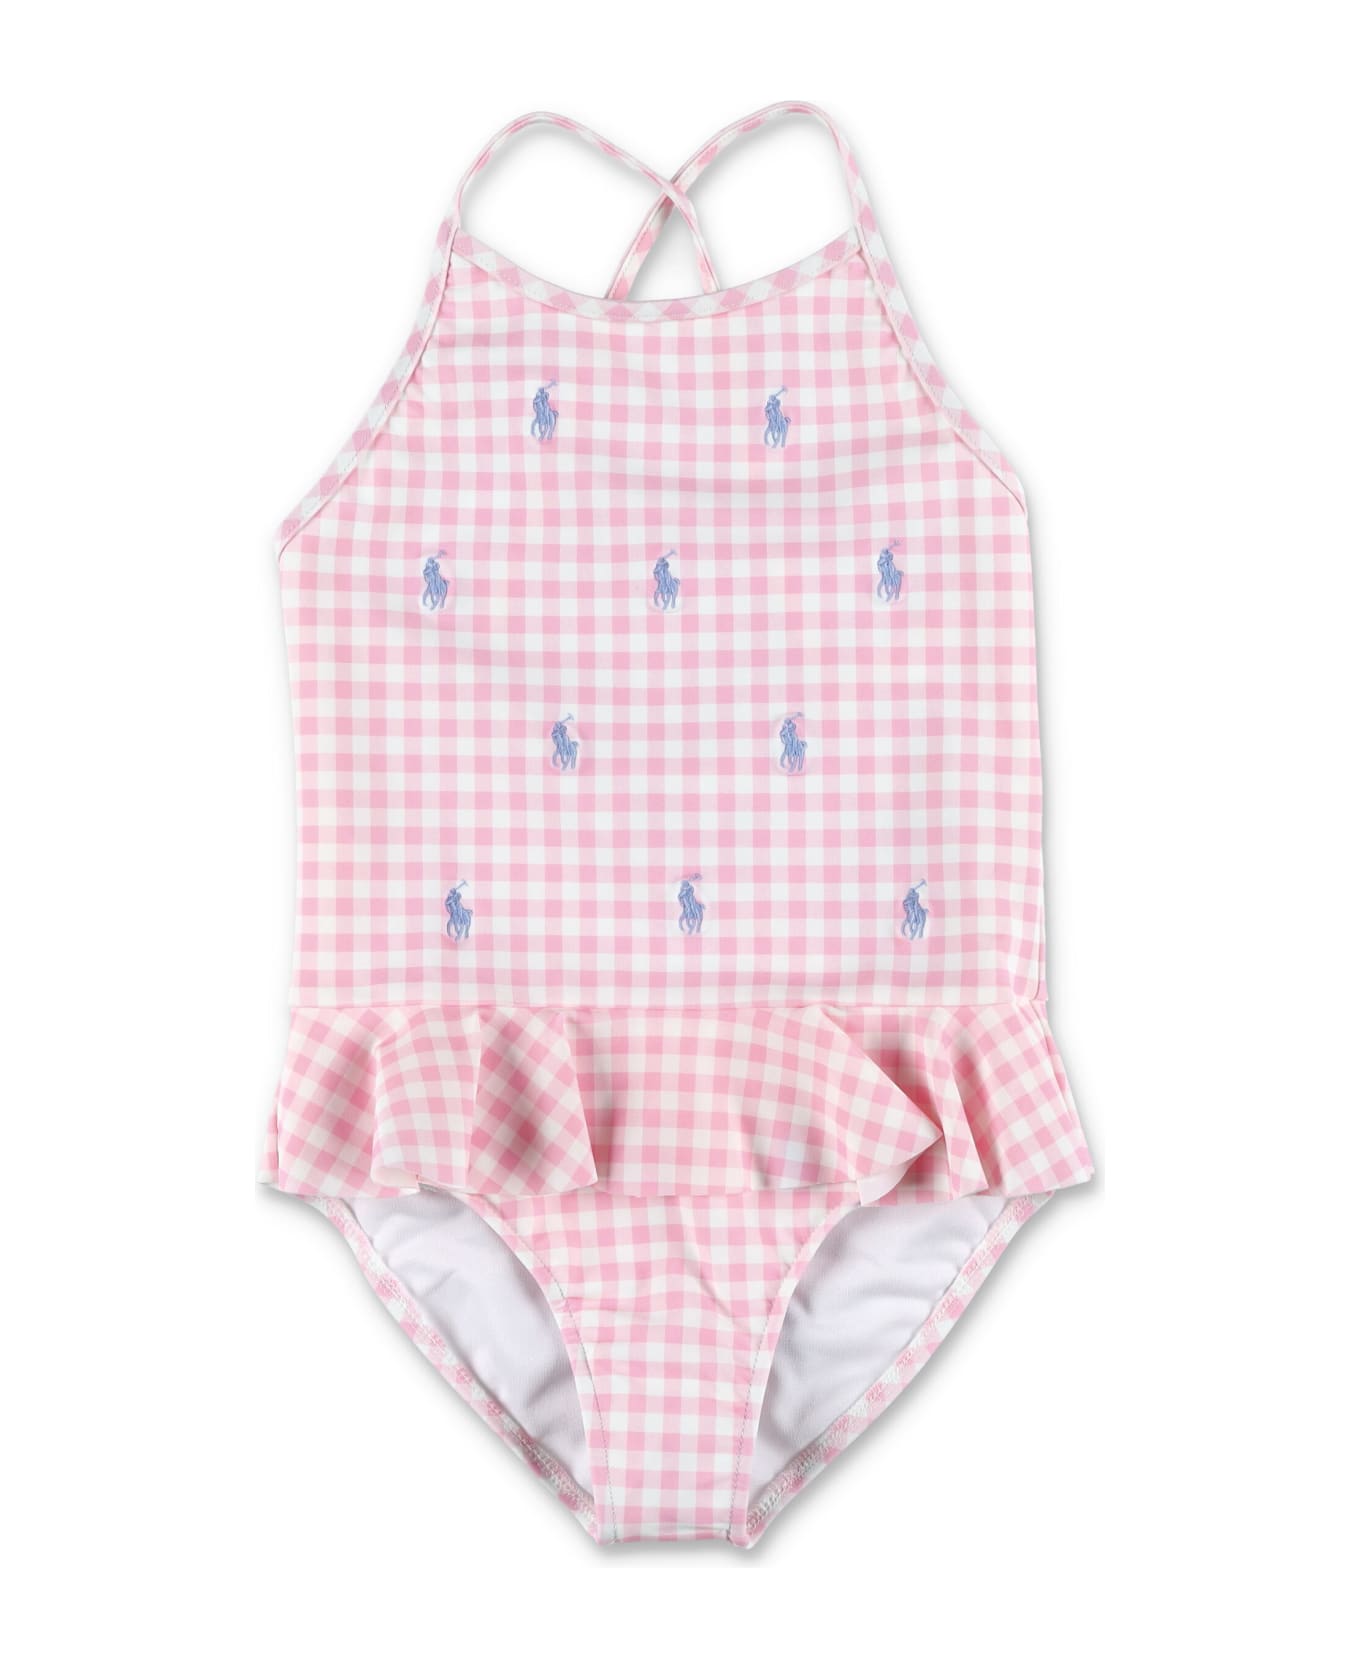 Polo Ralph Lauren Polo Pony Ruffled One-piece Swimsuit - PINK